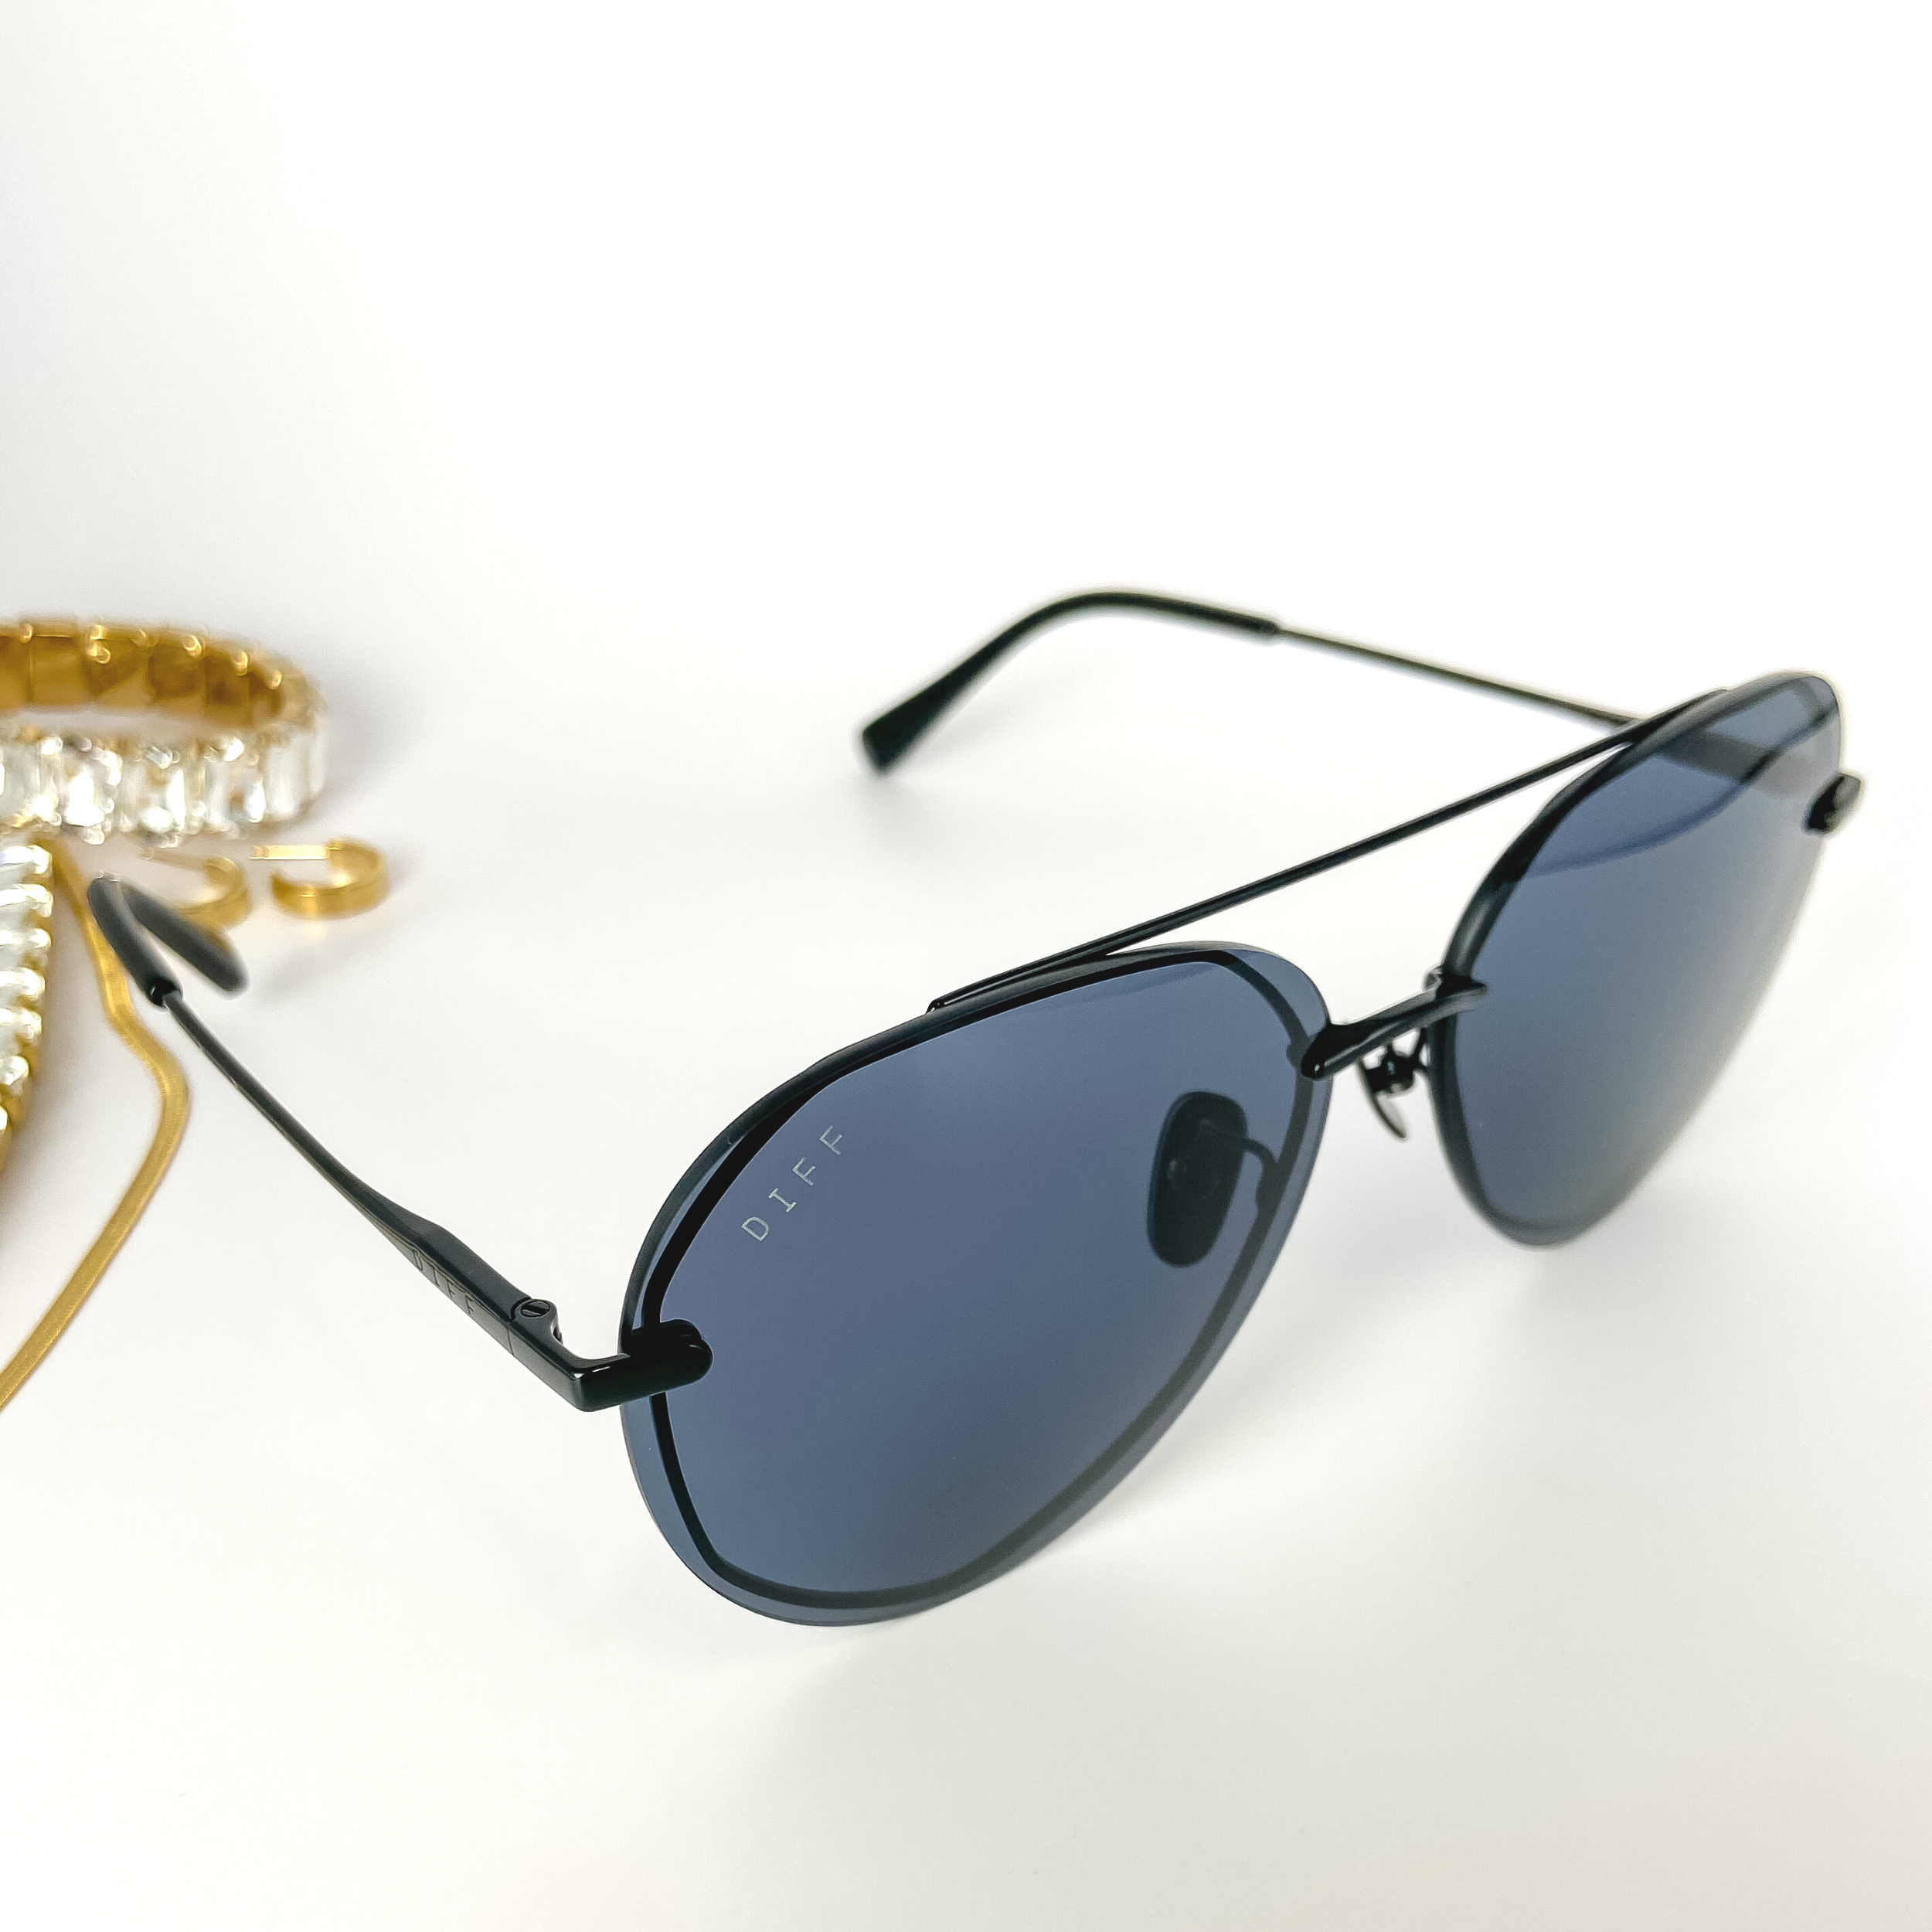 A pair of black aviator sunglasses with grey lenses. These sunglasses are pictured on a white background with gold jewelry.